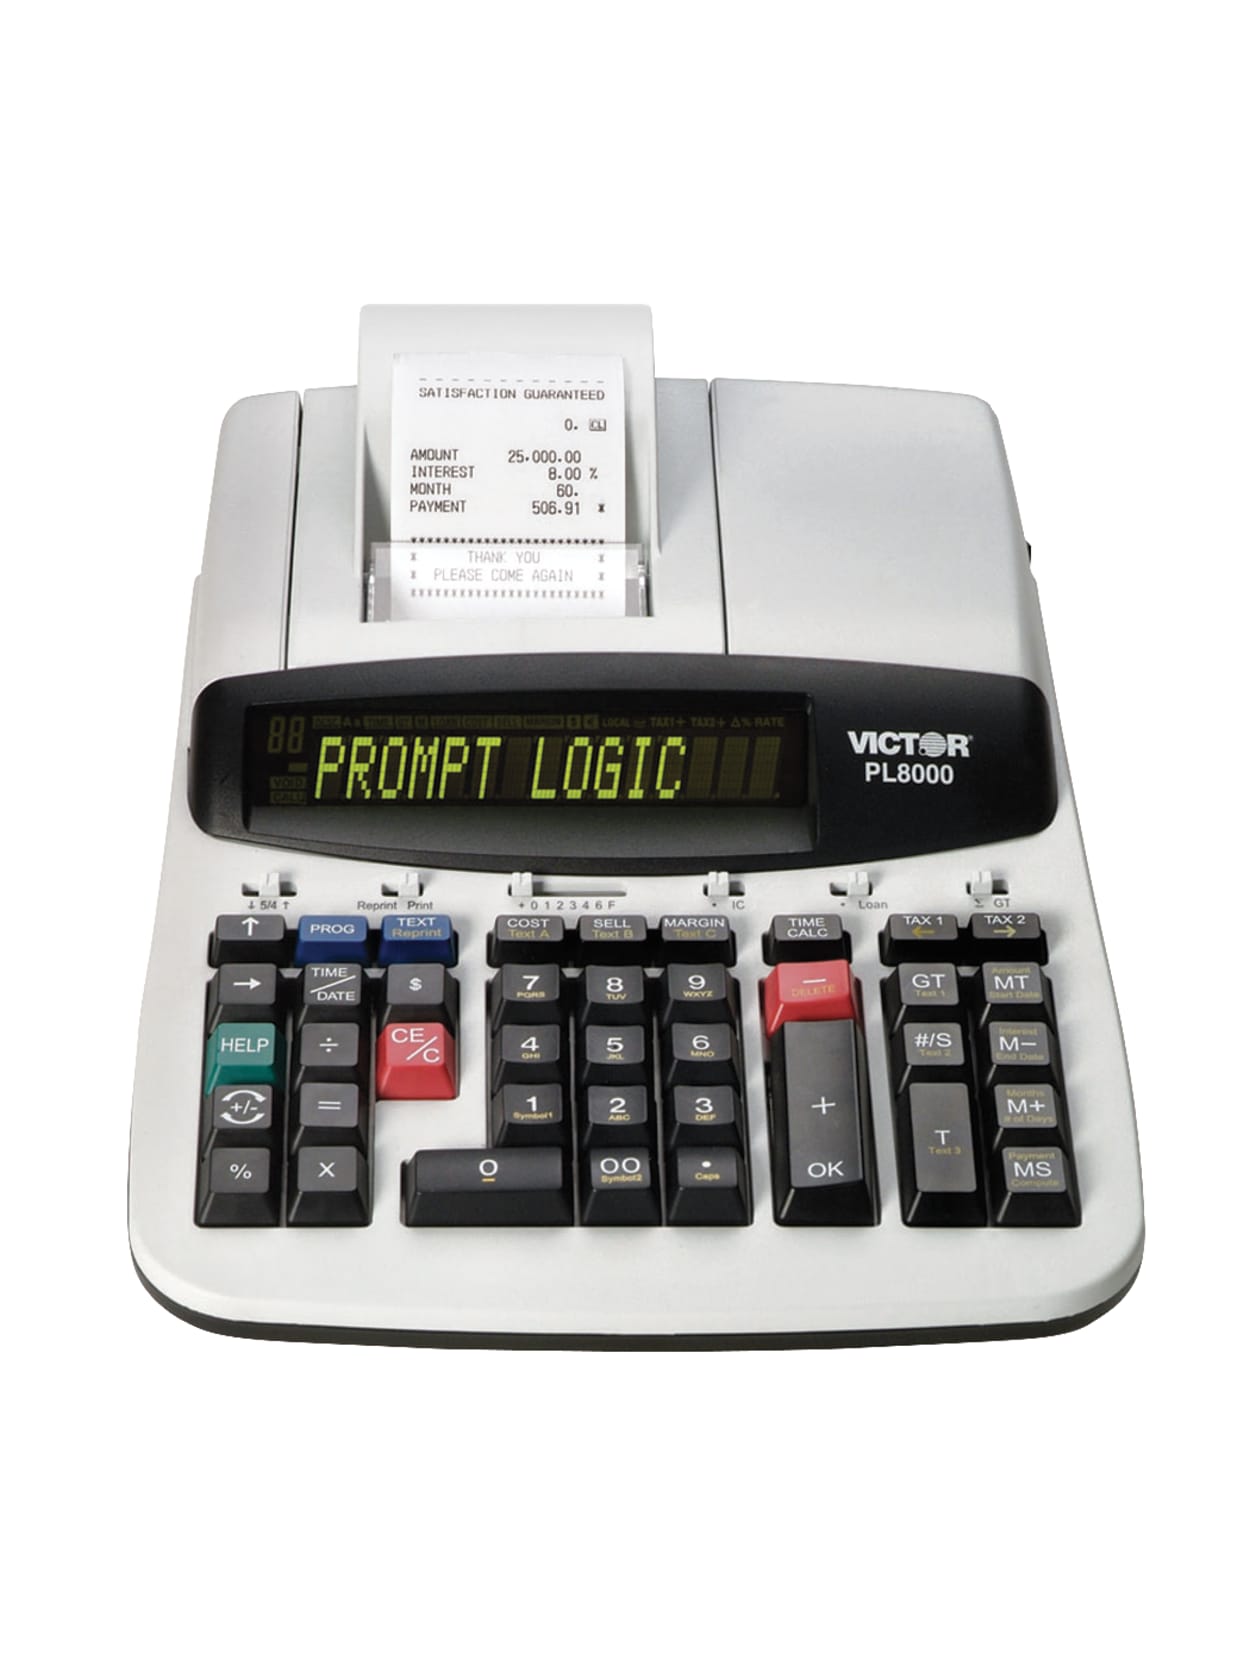 Victor Pl8000 Heavy Duty Commercial Thermal Printing Calculator